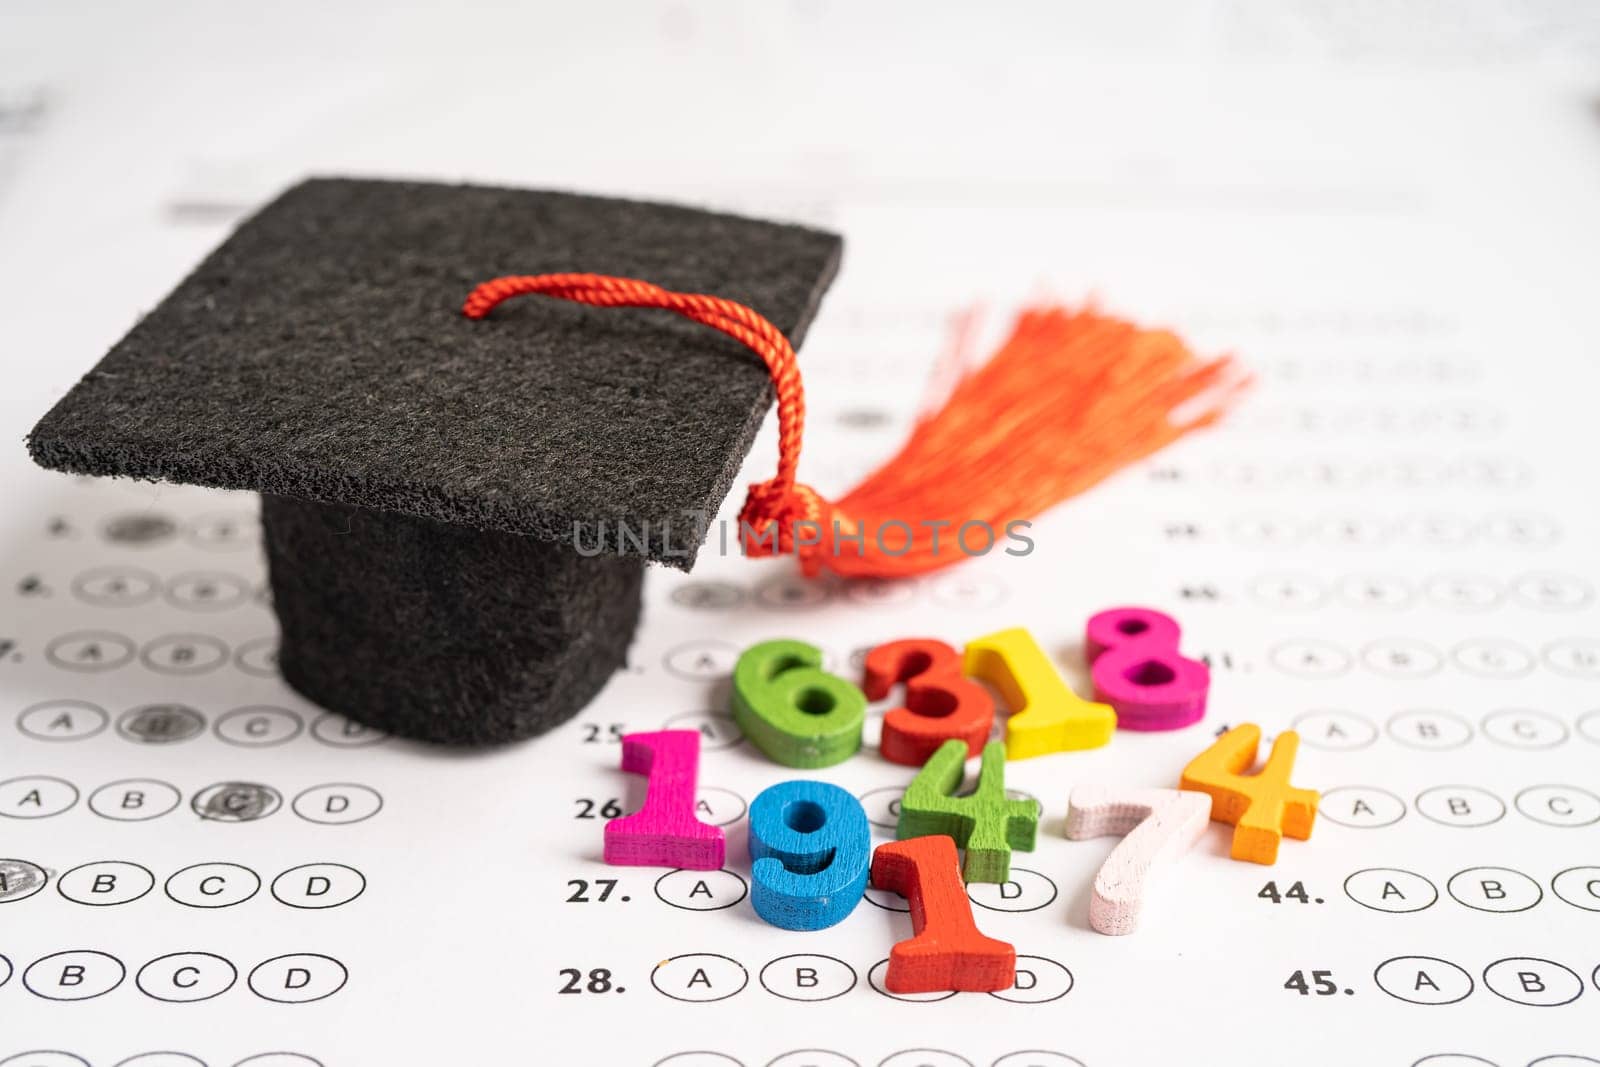 Graduation gap hat and pencil on answer sheet paper, Education study testing learning teach concept.